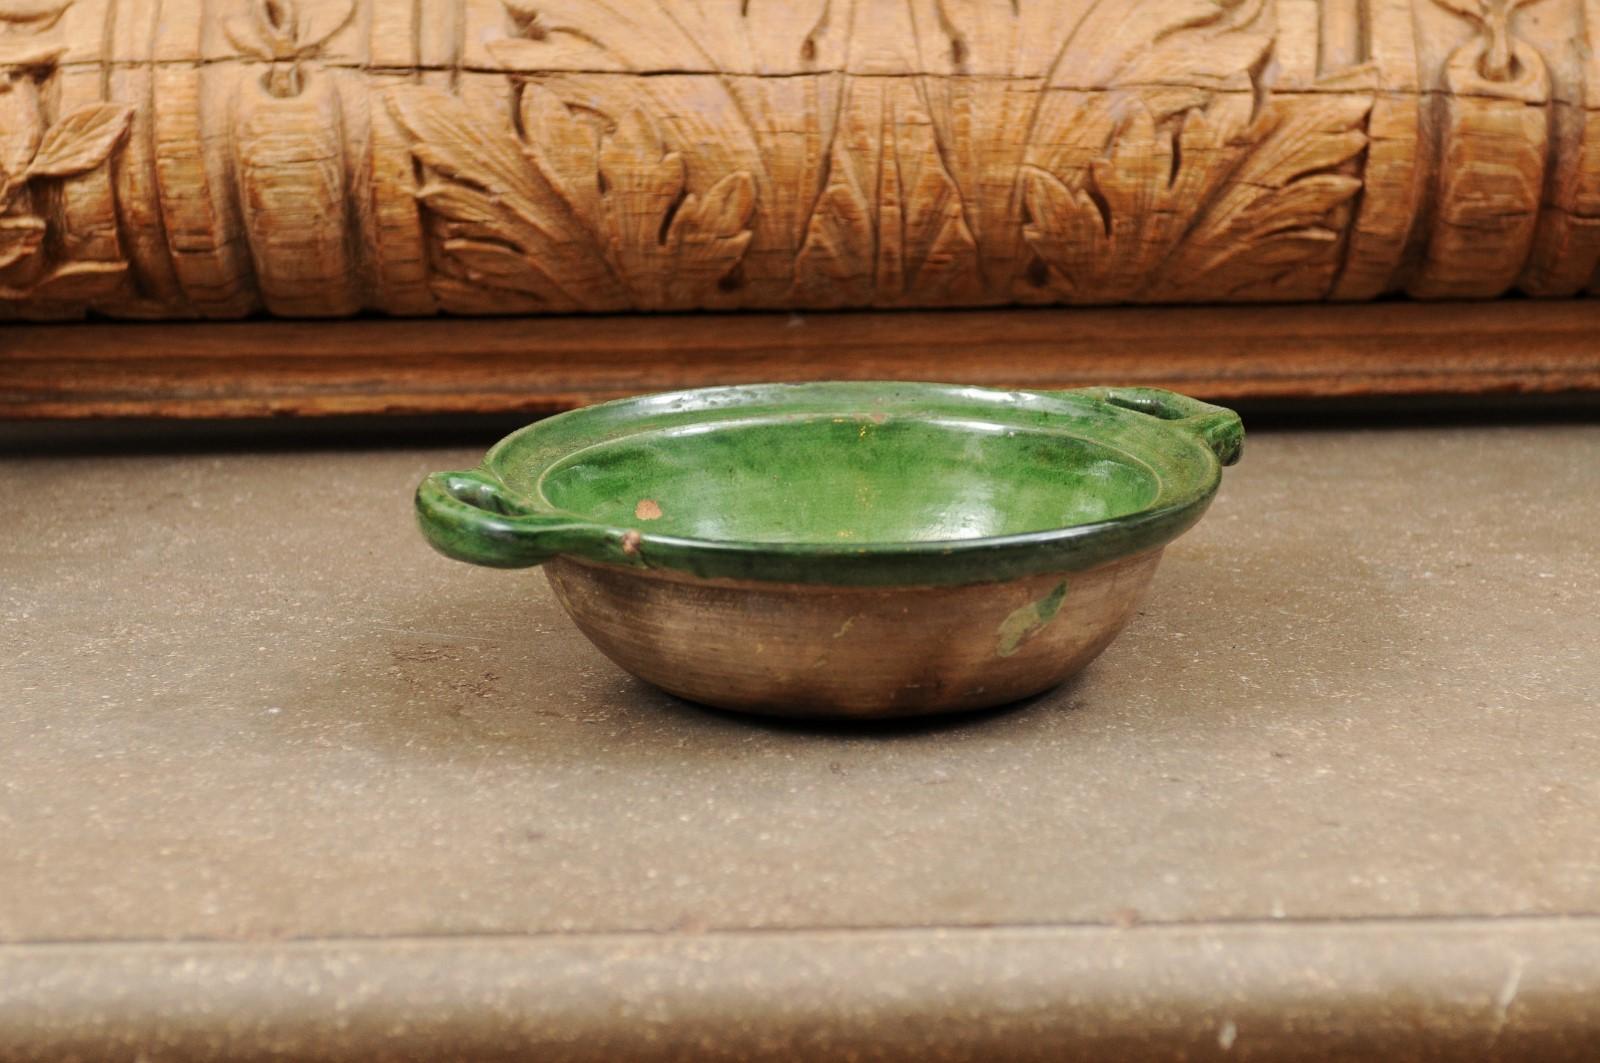 A French Provincial green glazed pottery bowl from the 19th century, with lateral handles and unfinished belly. Created in France during the 19th century, this pottery bowl features a circular body adorned with a green glaze on the interior, while